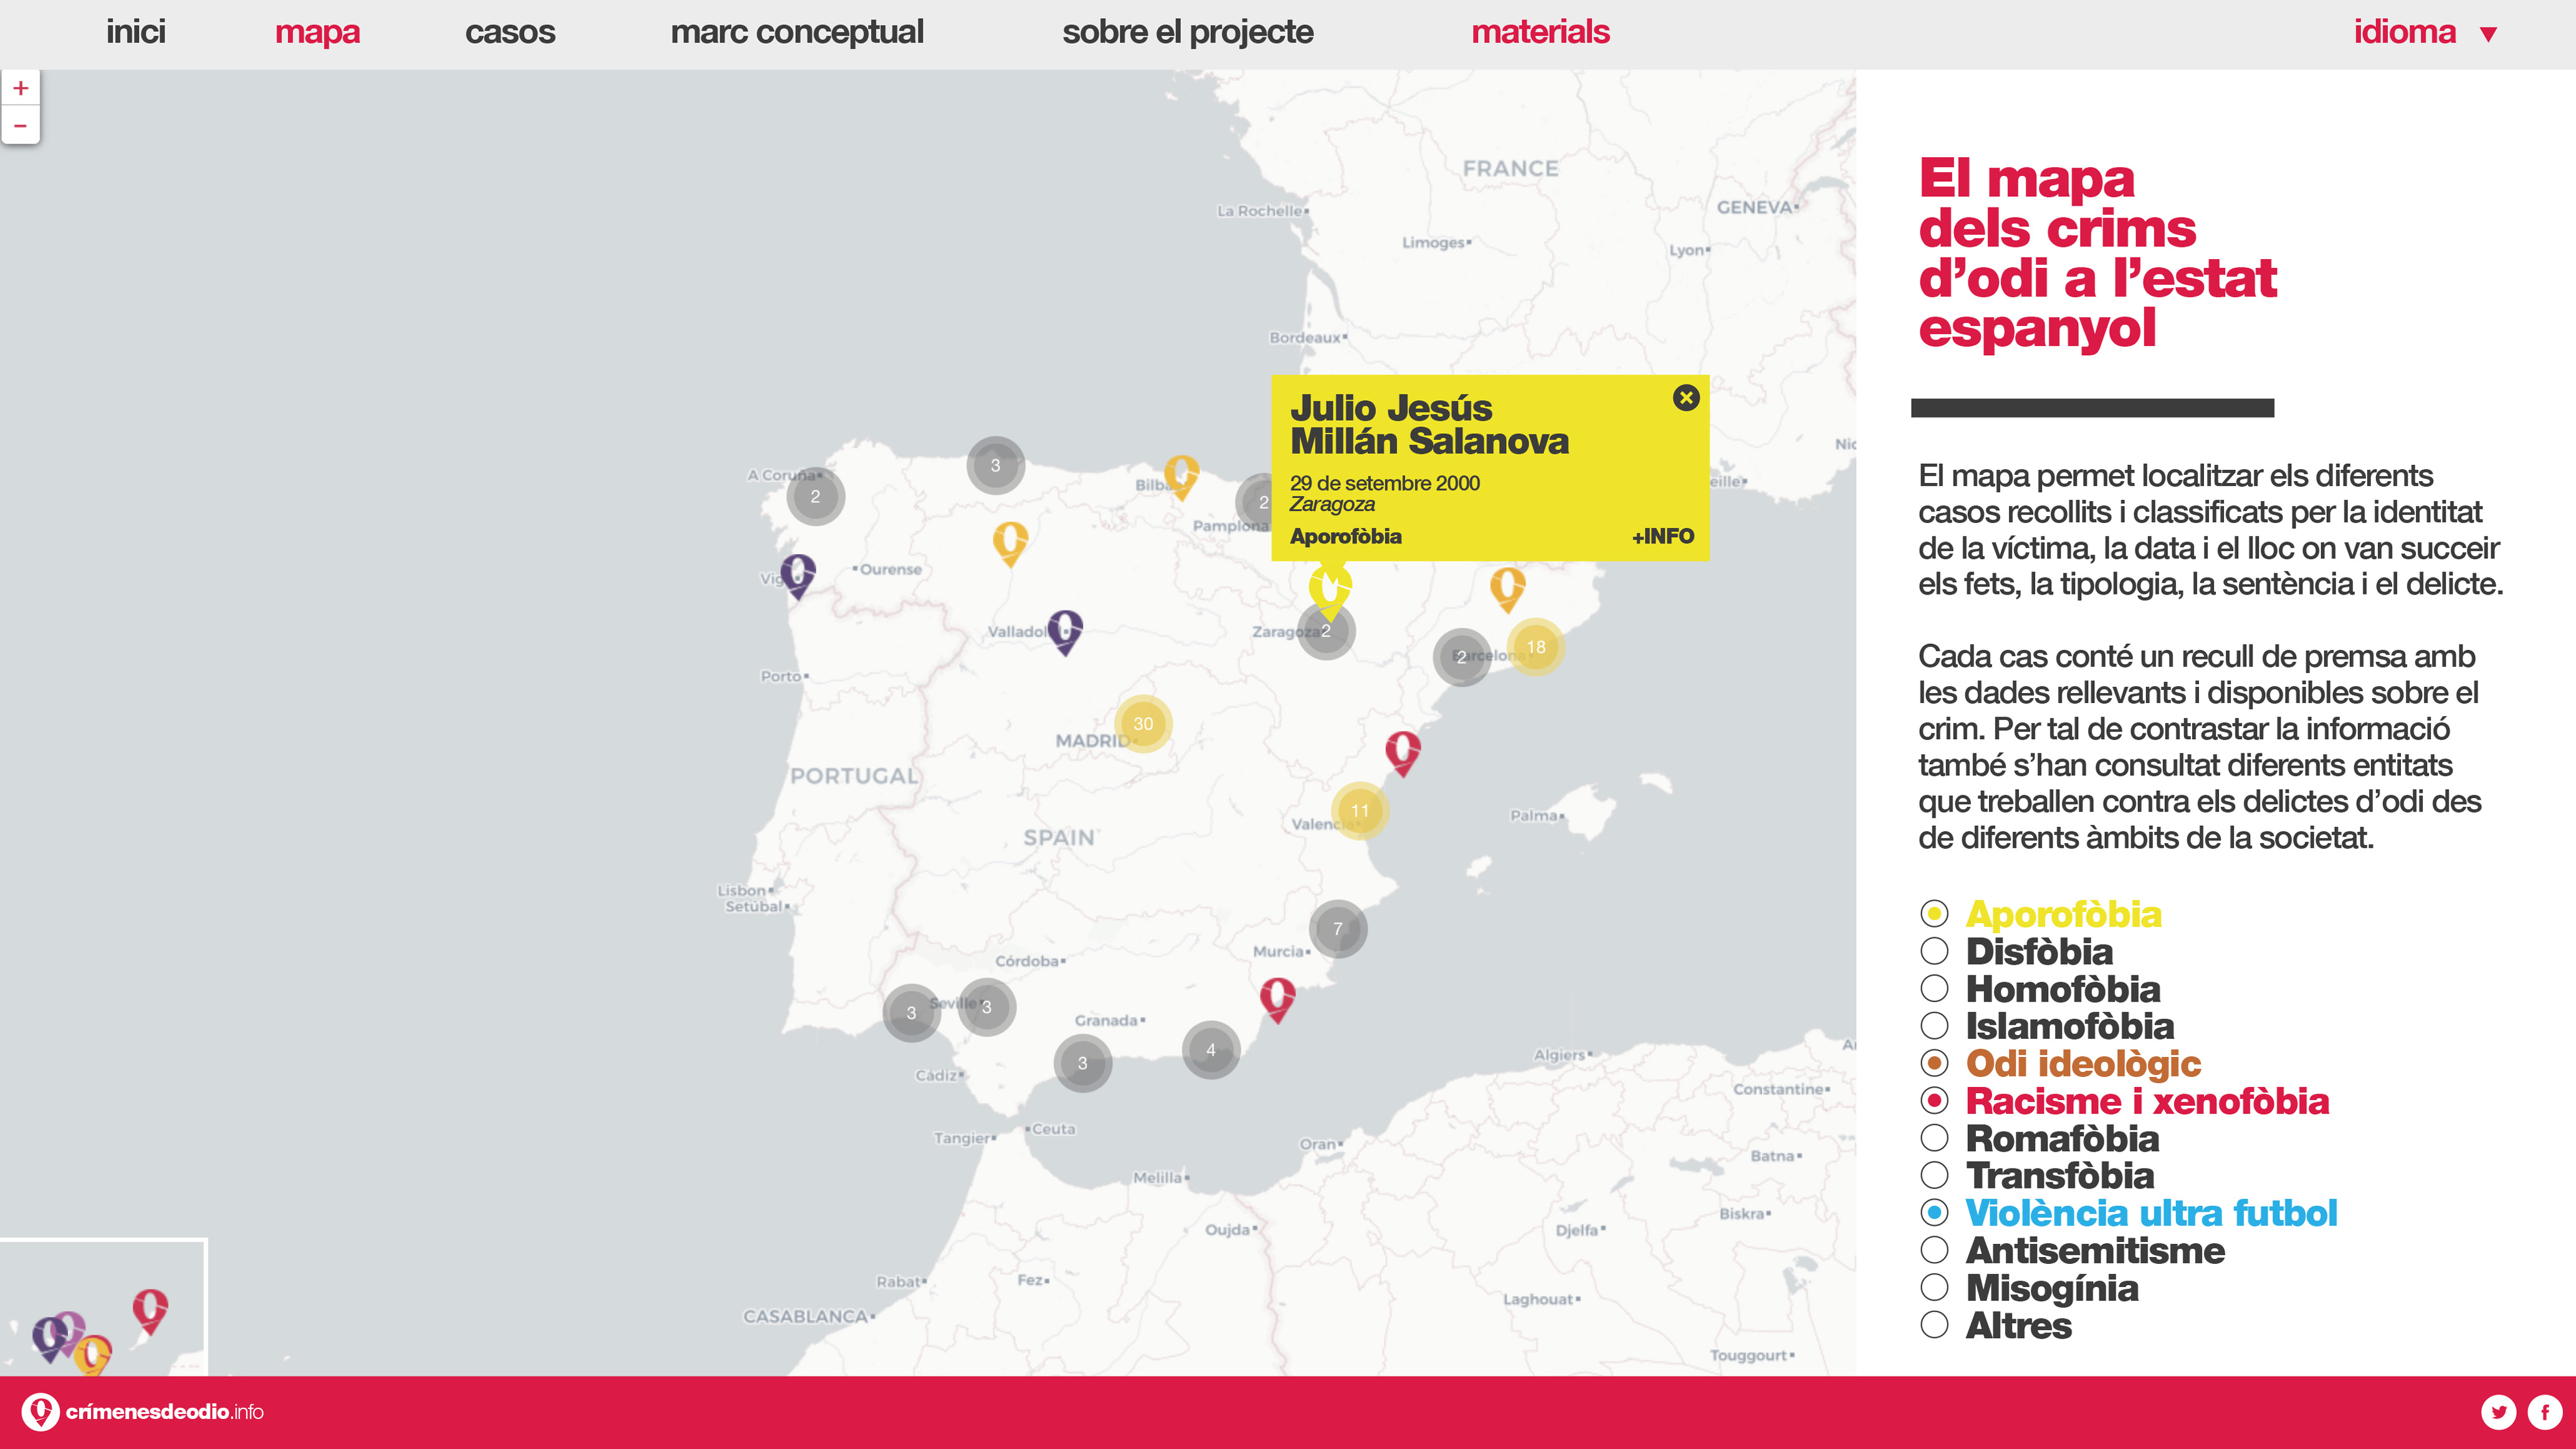 Map of Spain highlighting hate crimes (from the website crimenesdeodio.com)